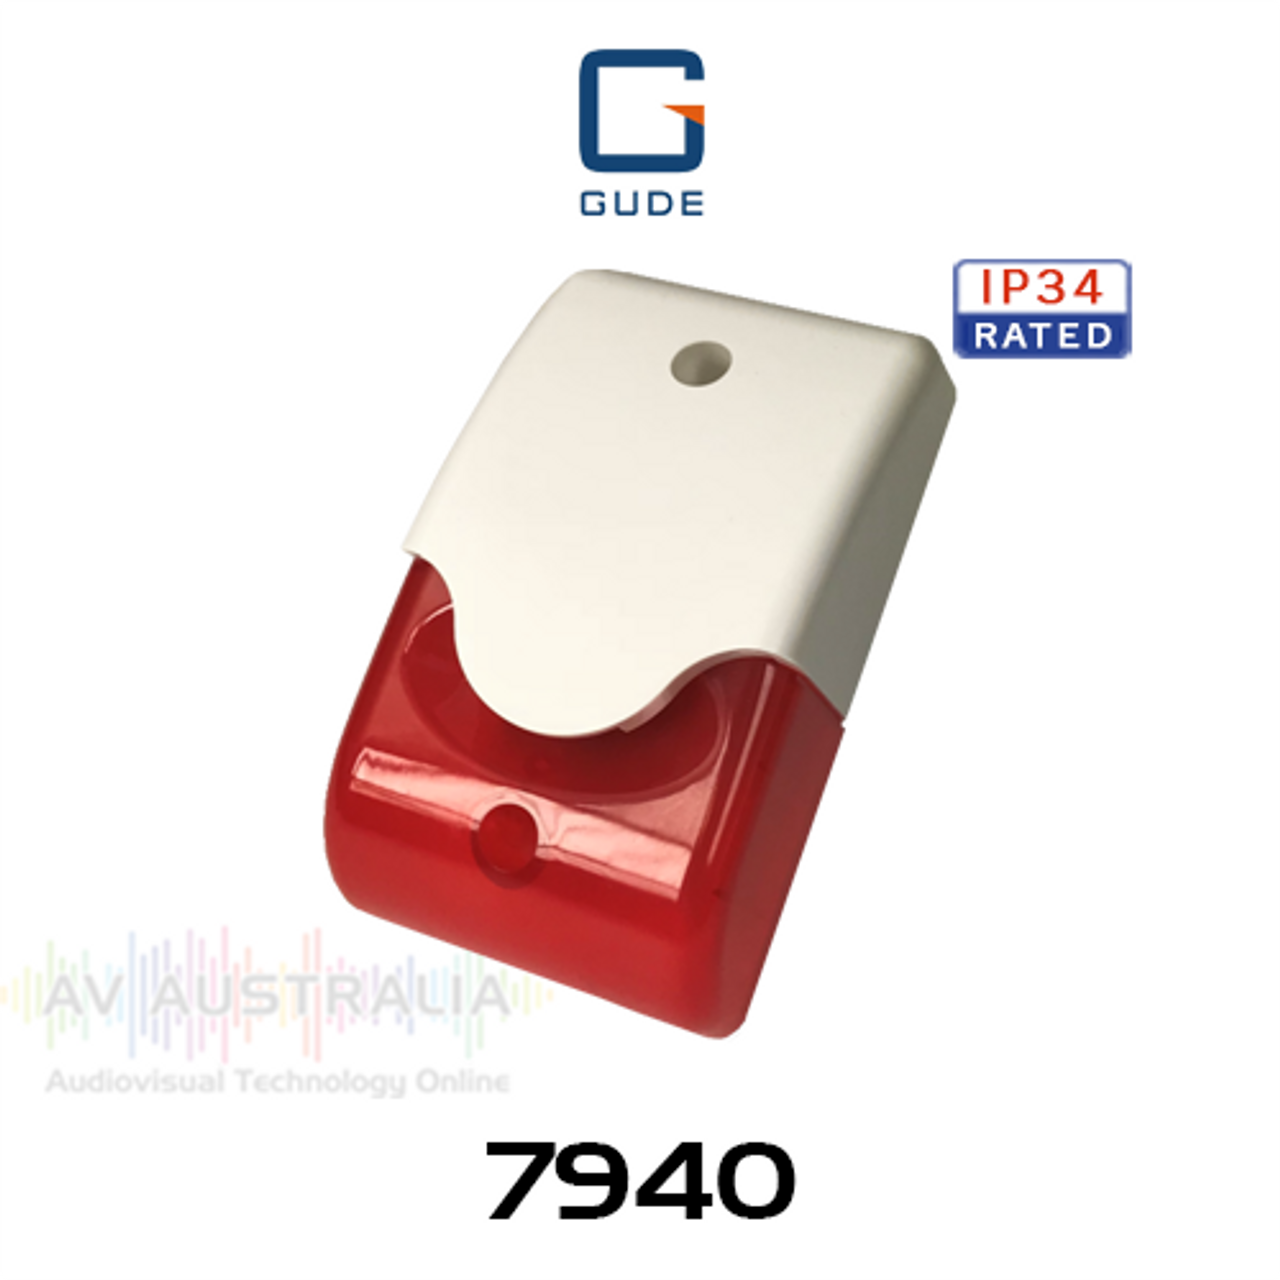 GUDE Optical & Acoustic Alarm Signaling Device